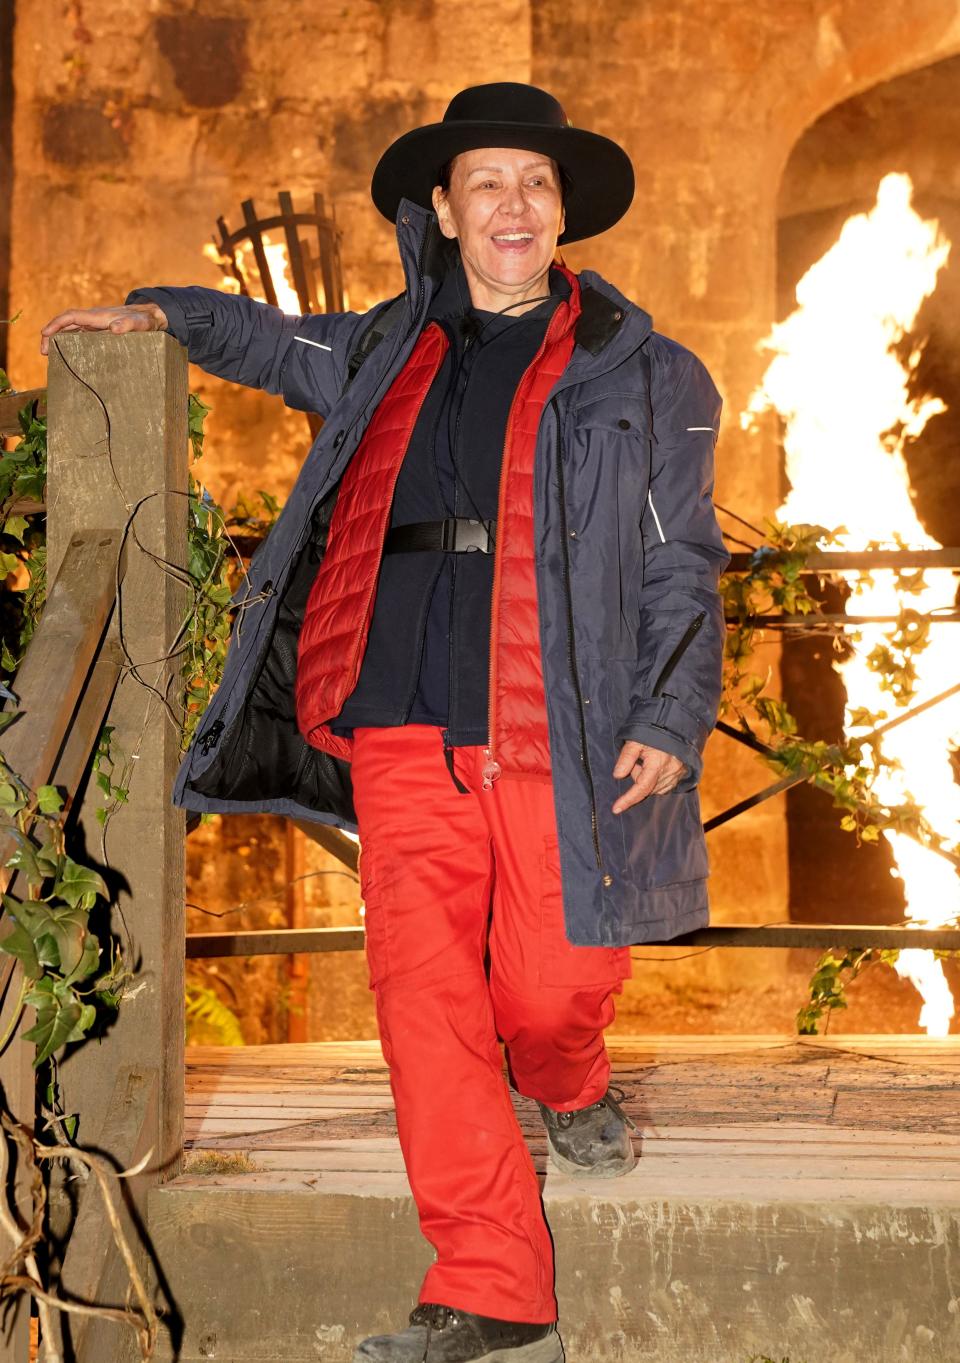 Dame Arlene Phillips holds the record as the eldest ever contestant on 'I'm a Celebrity... Get Me Out of Here!' (ITV/Shutterstock)